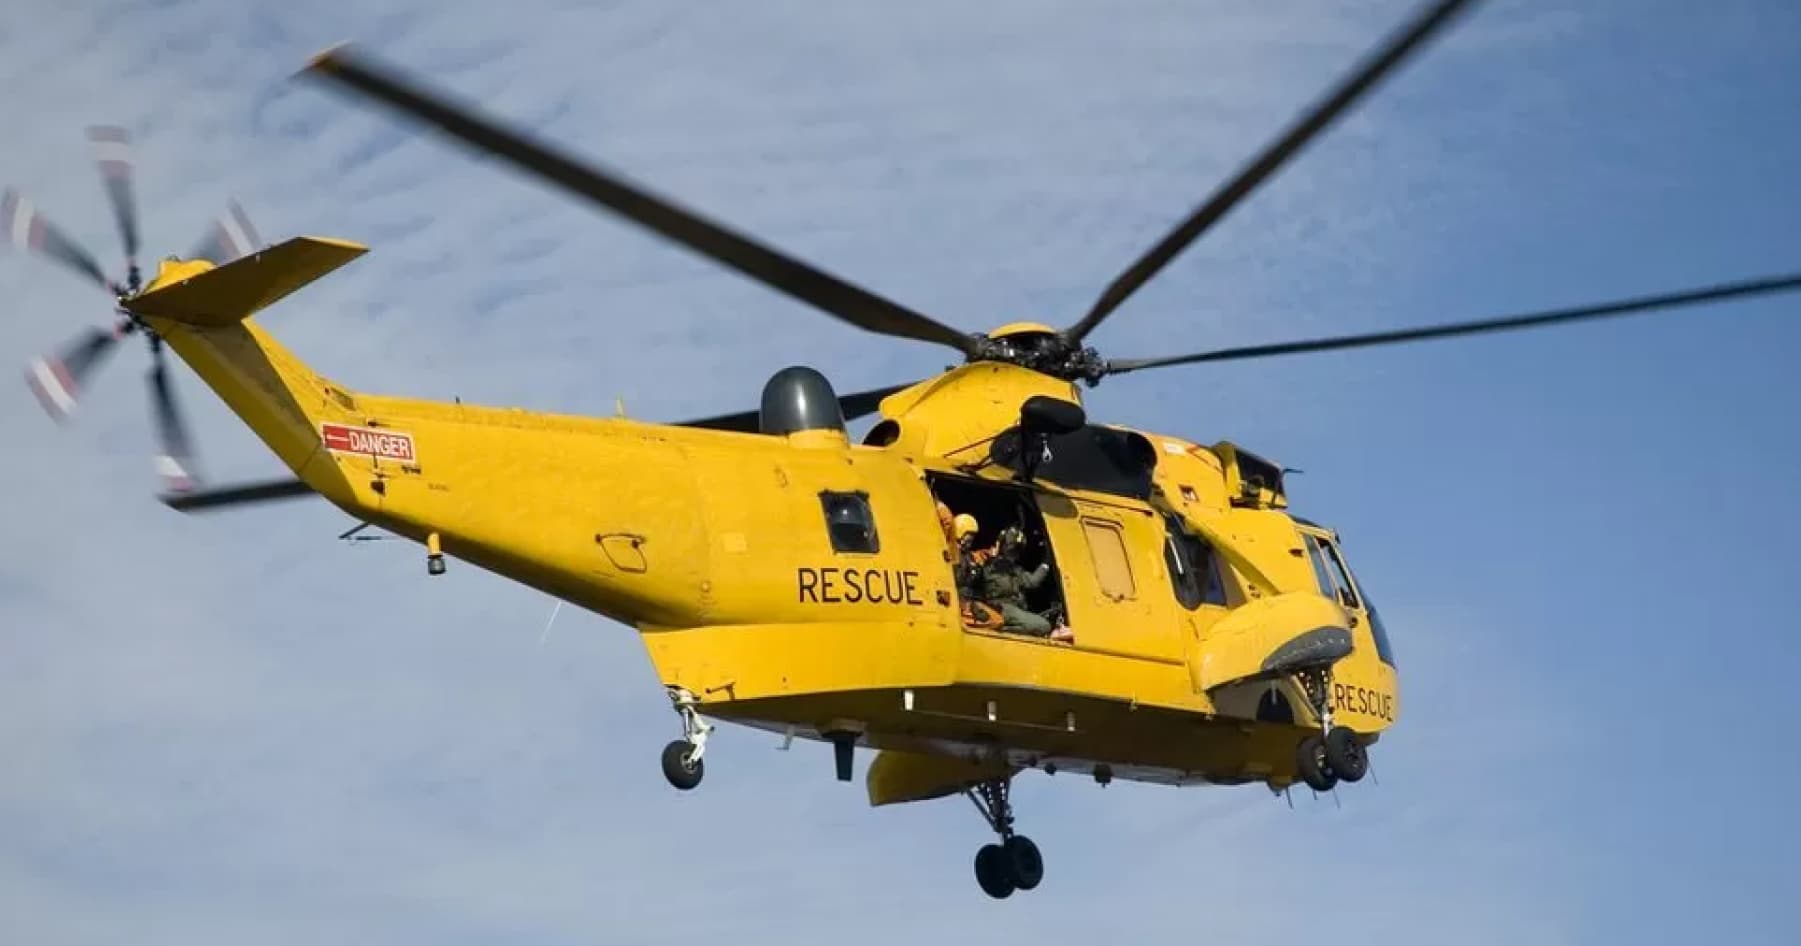 The UK will hand over three Sea King rotorcraft and 10,000 artillery shells to Ukraine